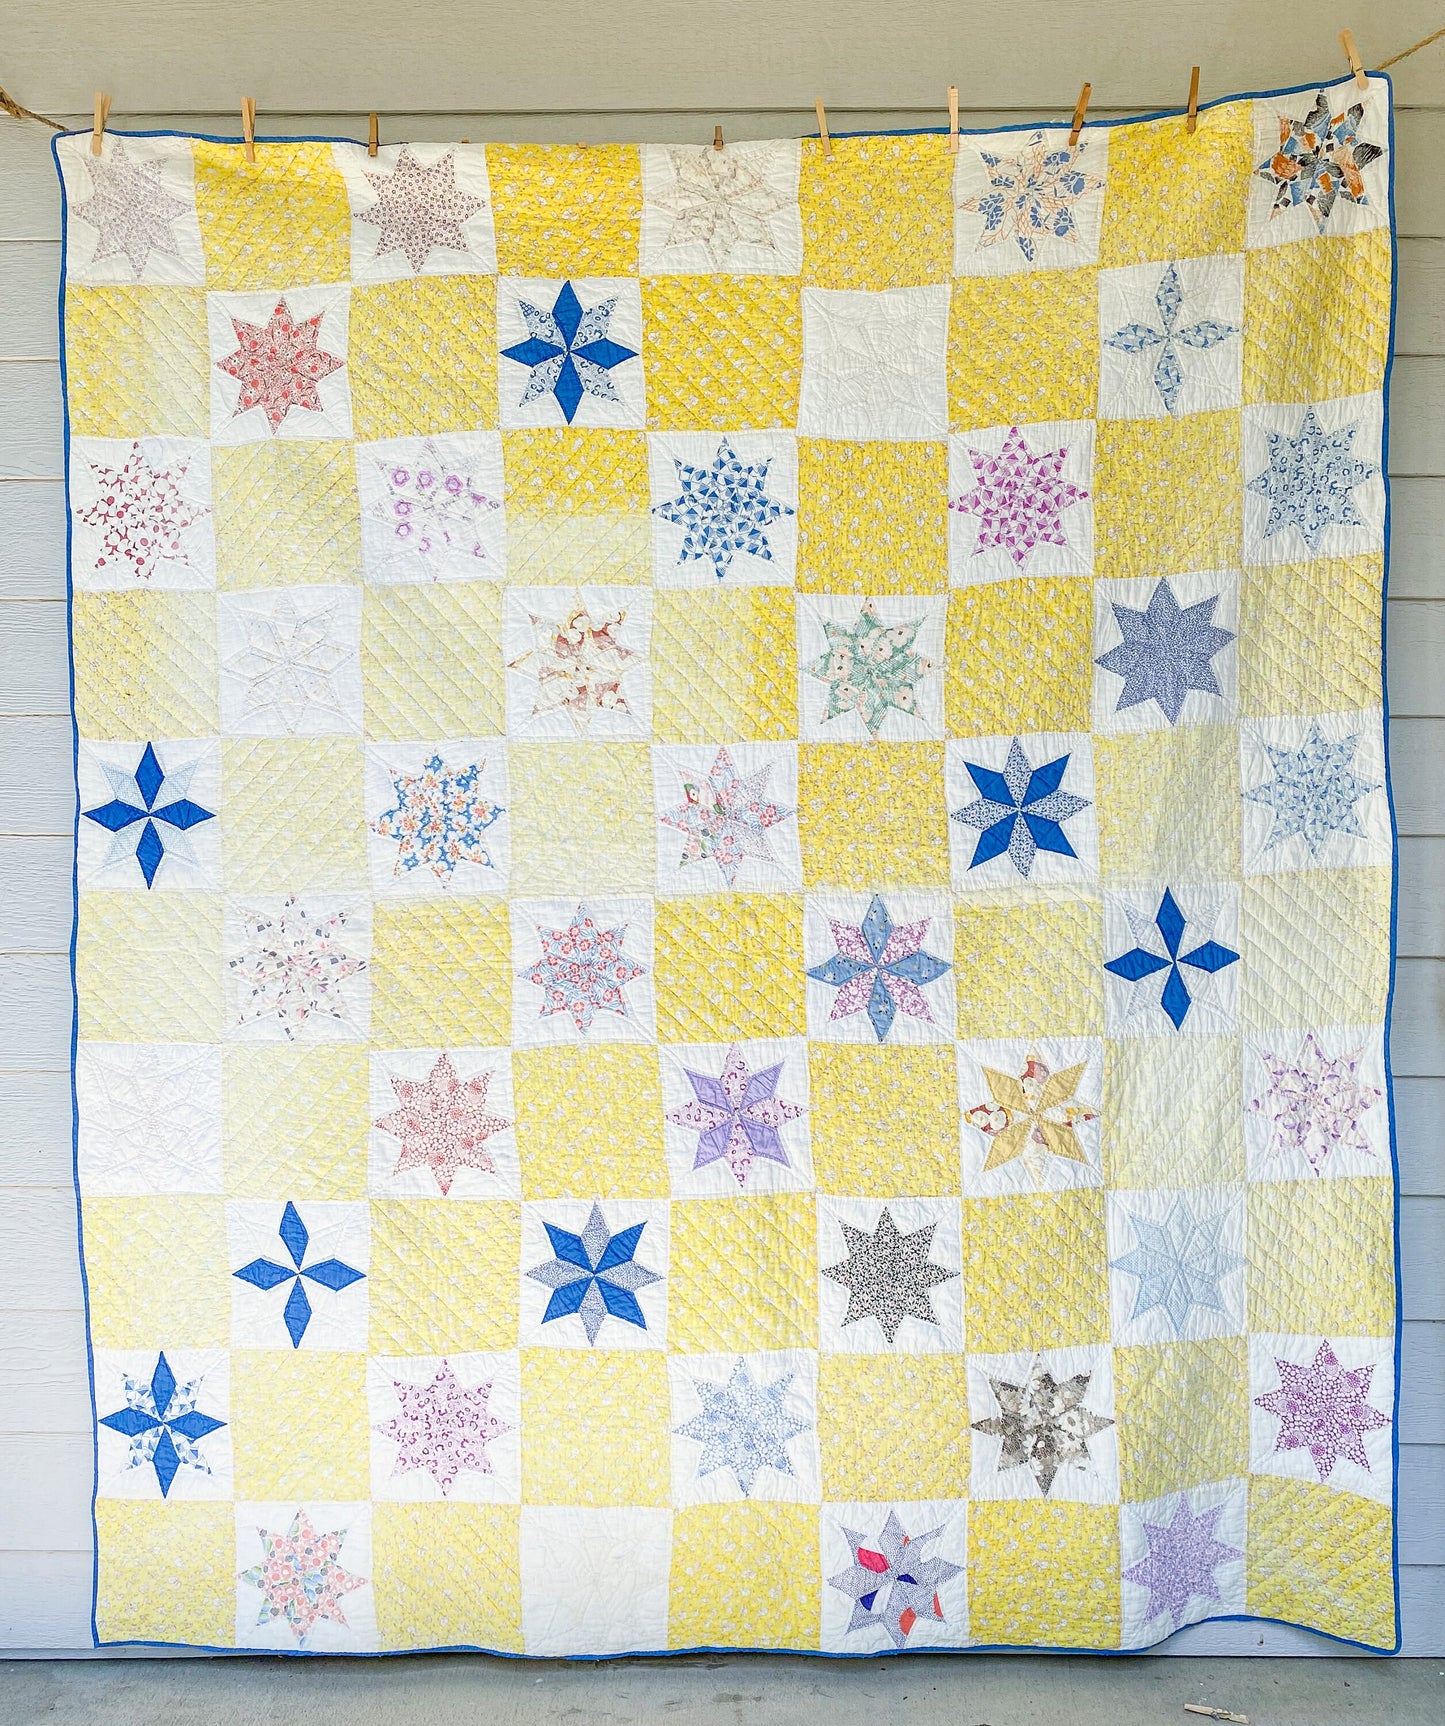 Vintage Yellow and Blue Eight Point Star Quilt, c1950s, 79" x 76"